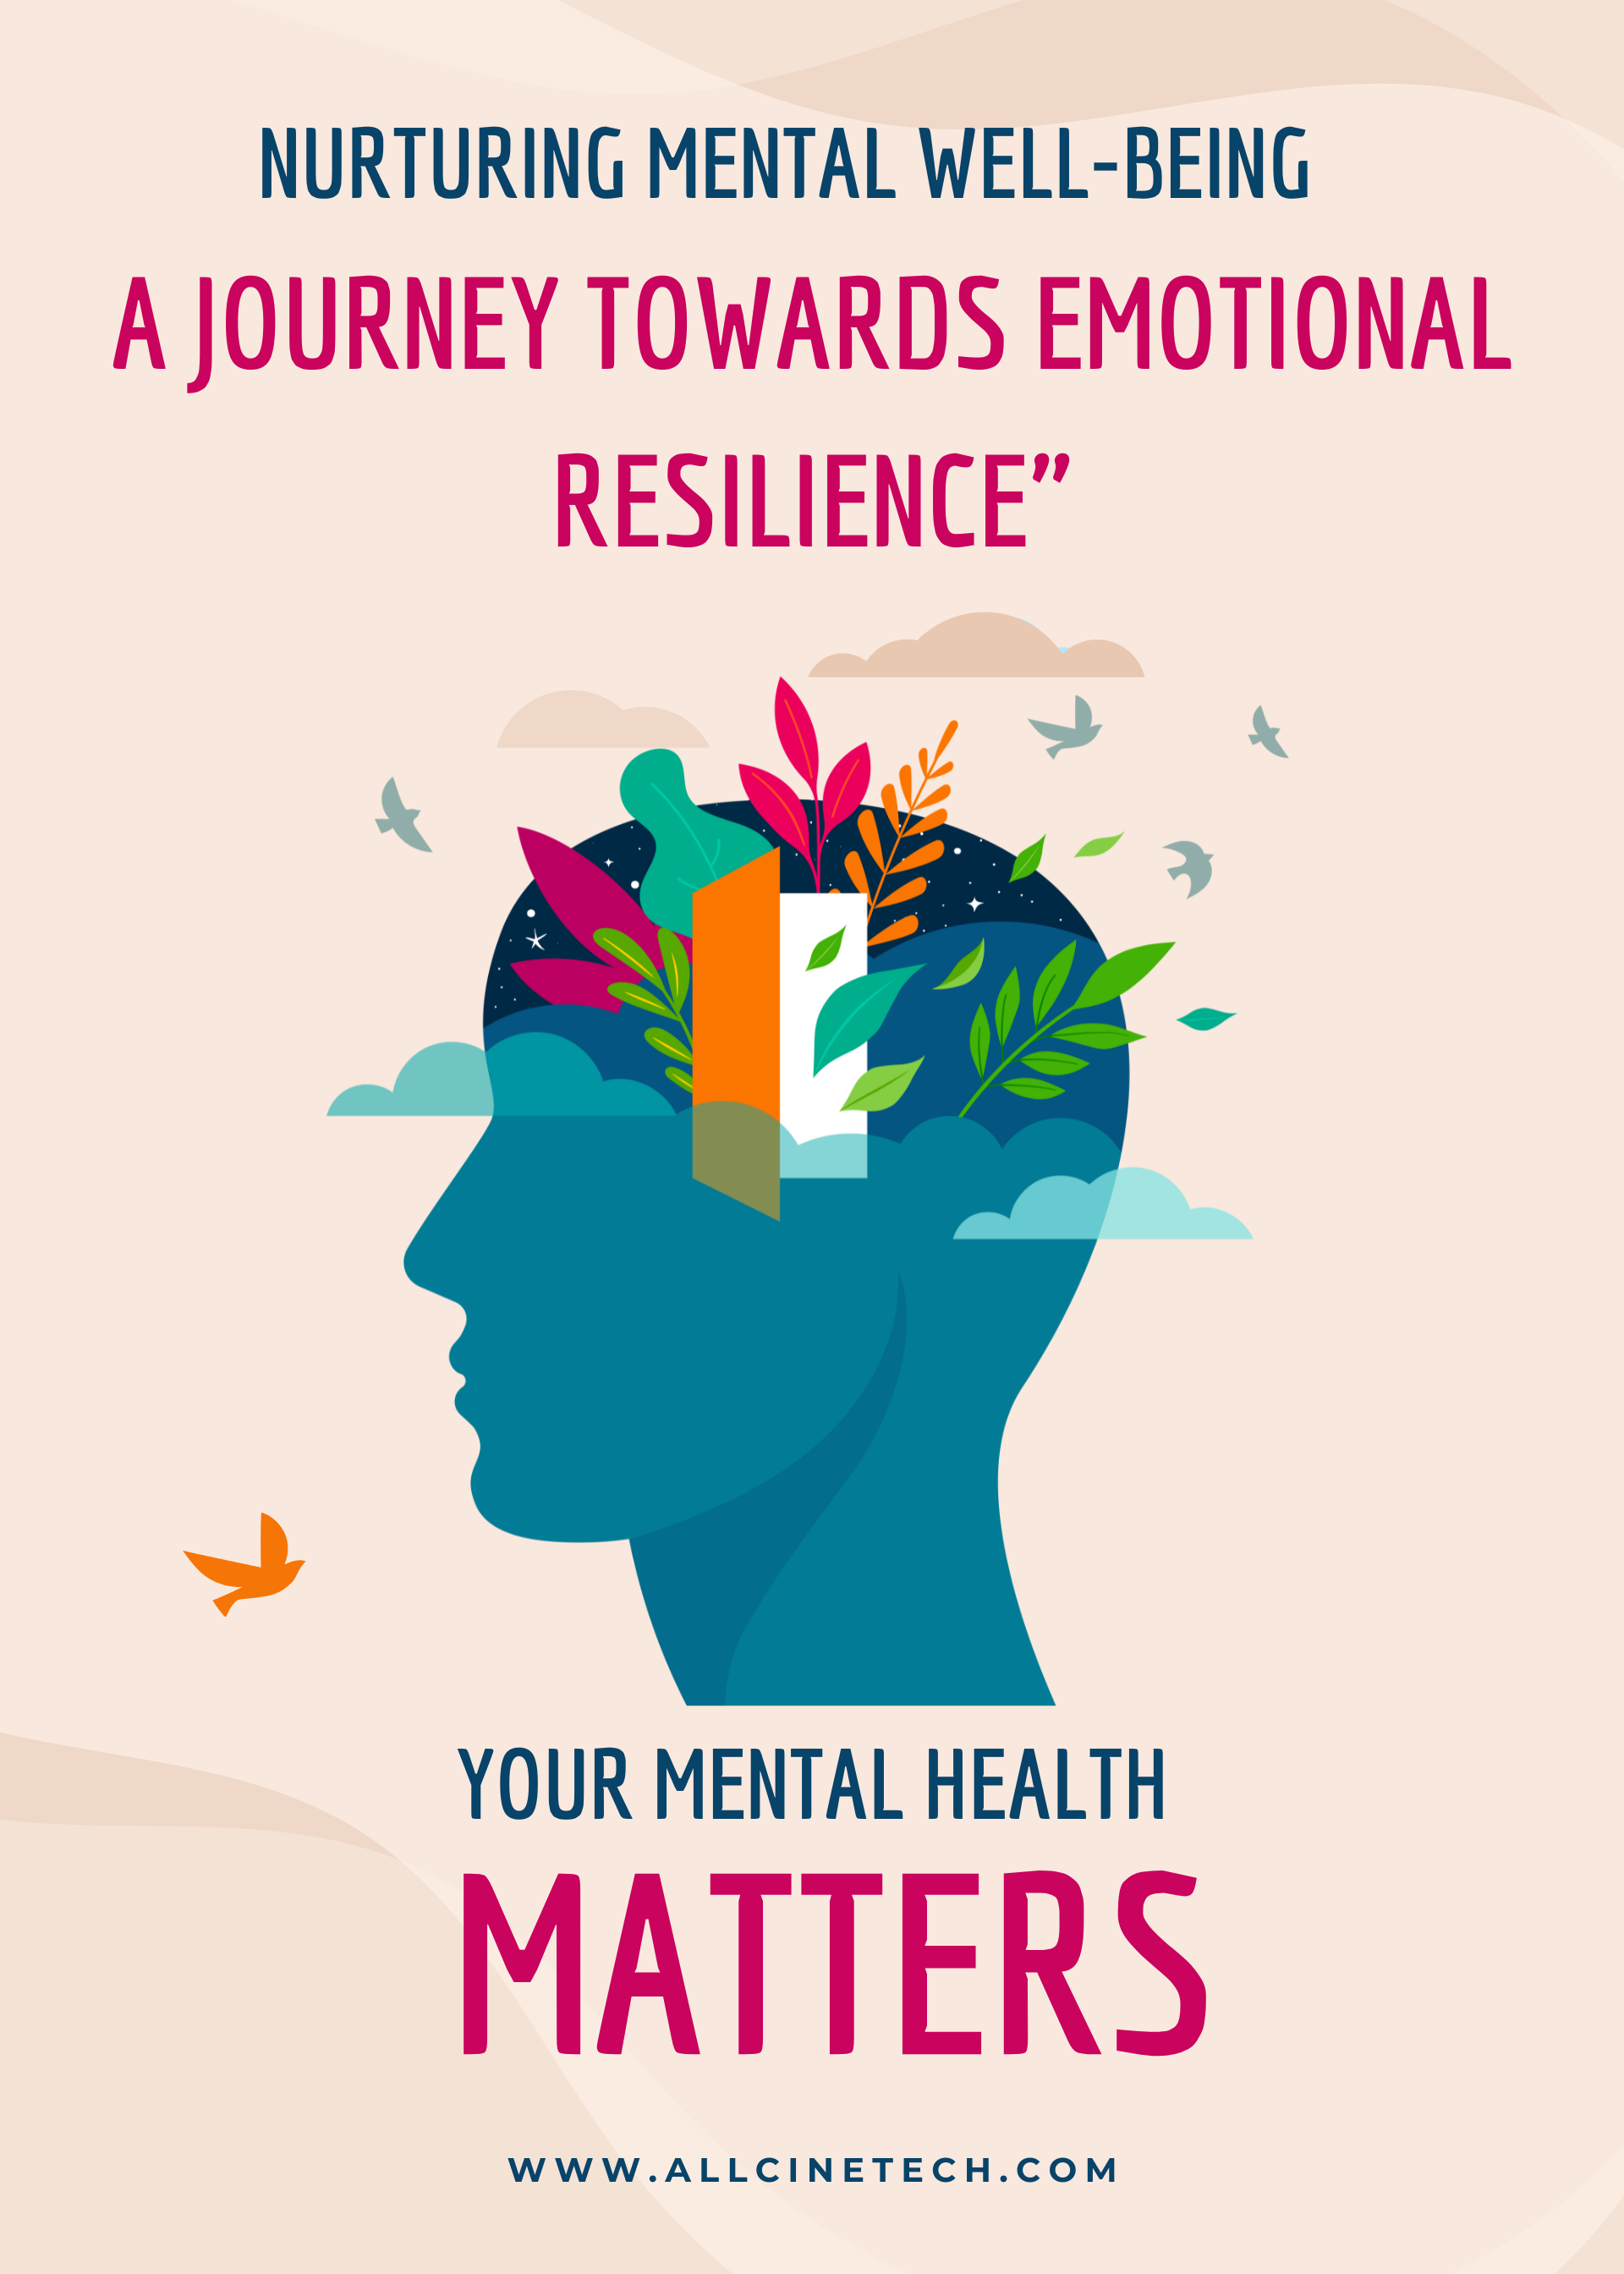 Nurturing Mental Well-Being: A Journey Towards Emotional Resilience